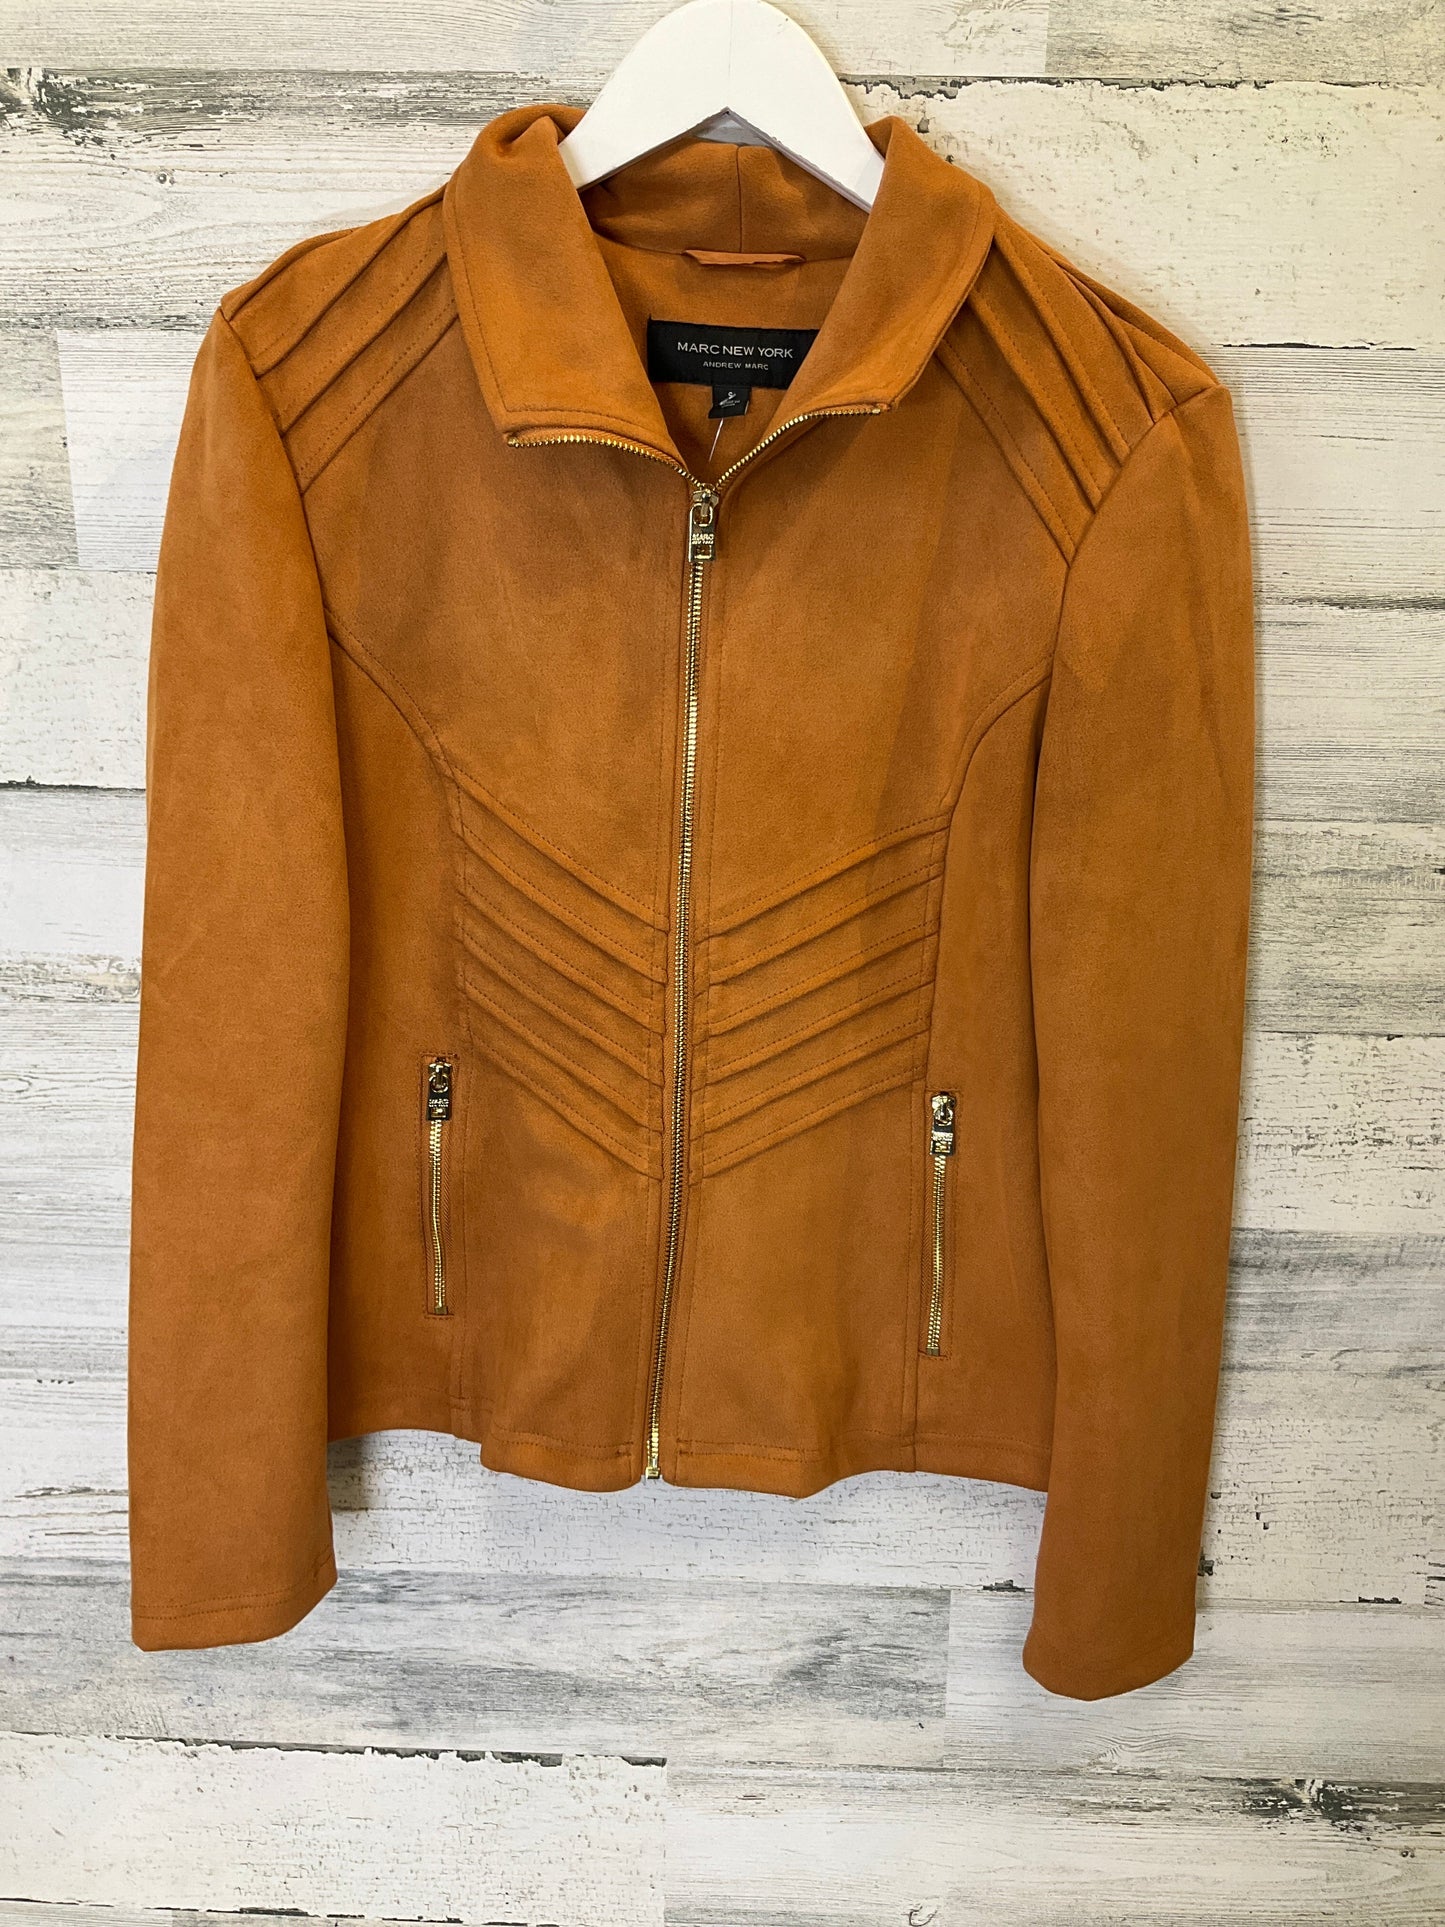 Tan Jacket Other Marc New York, Size S